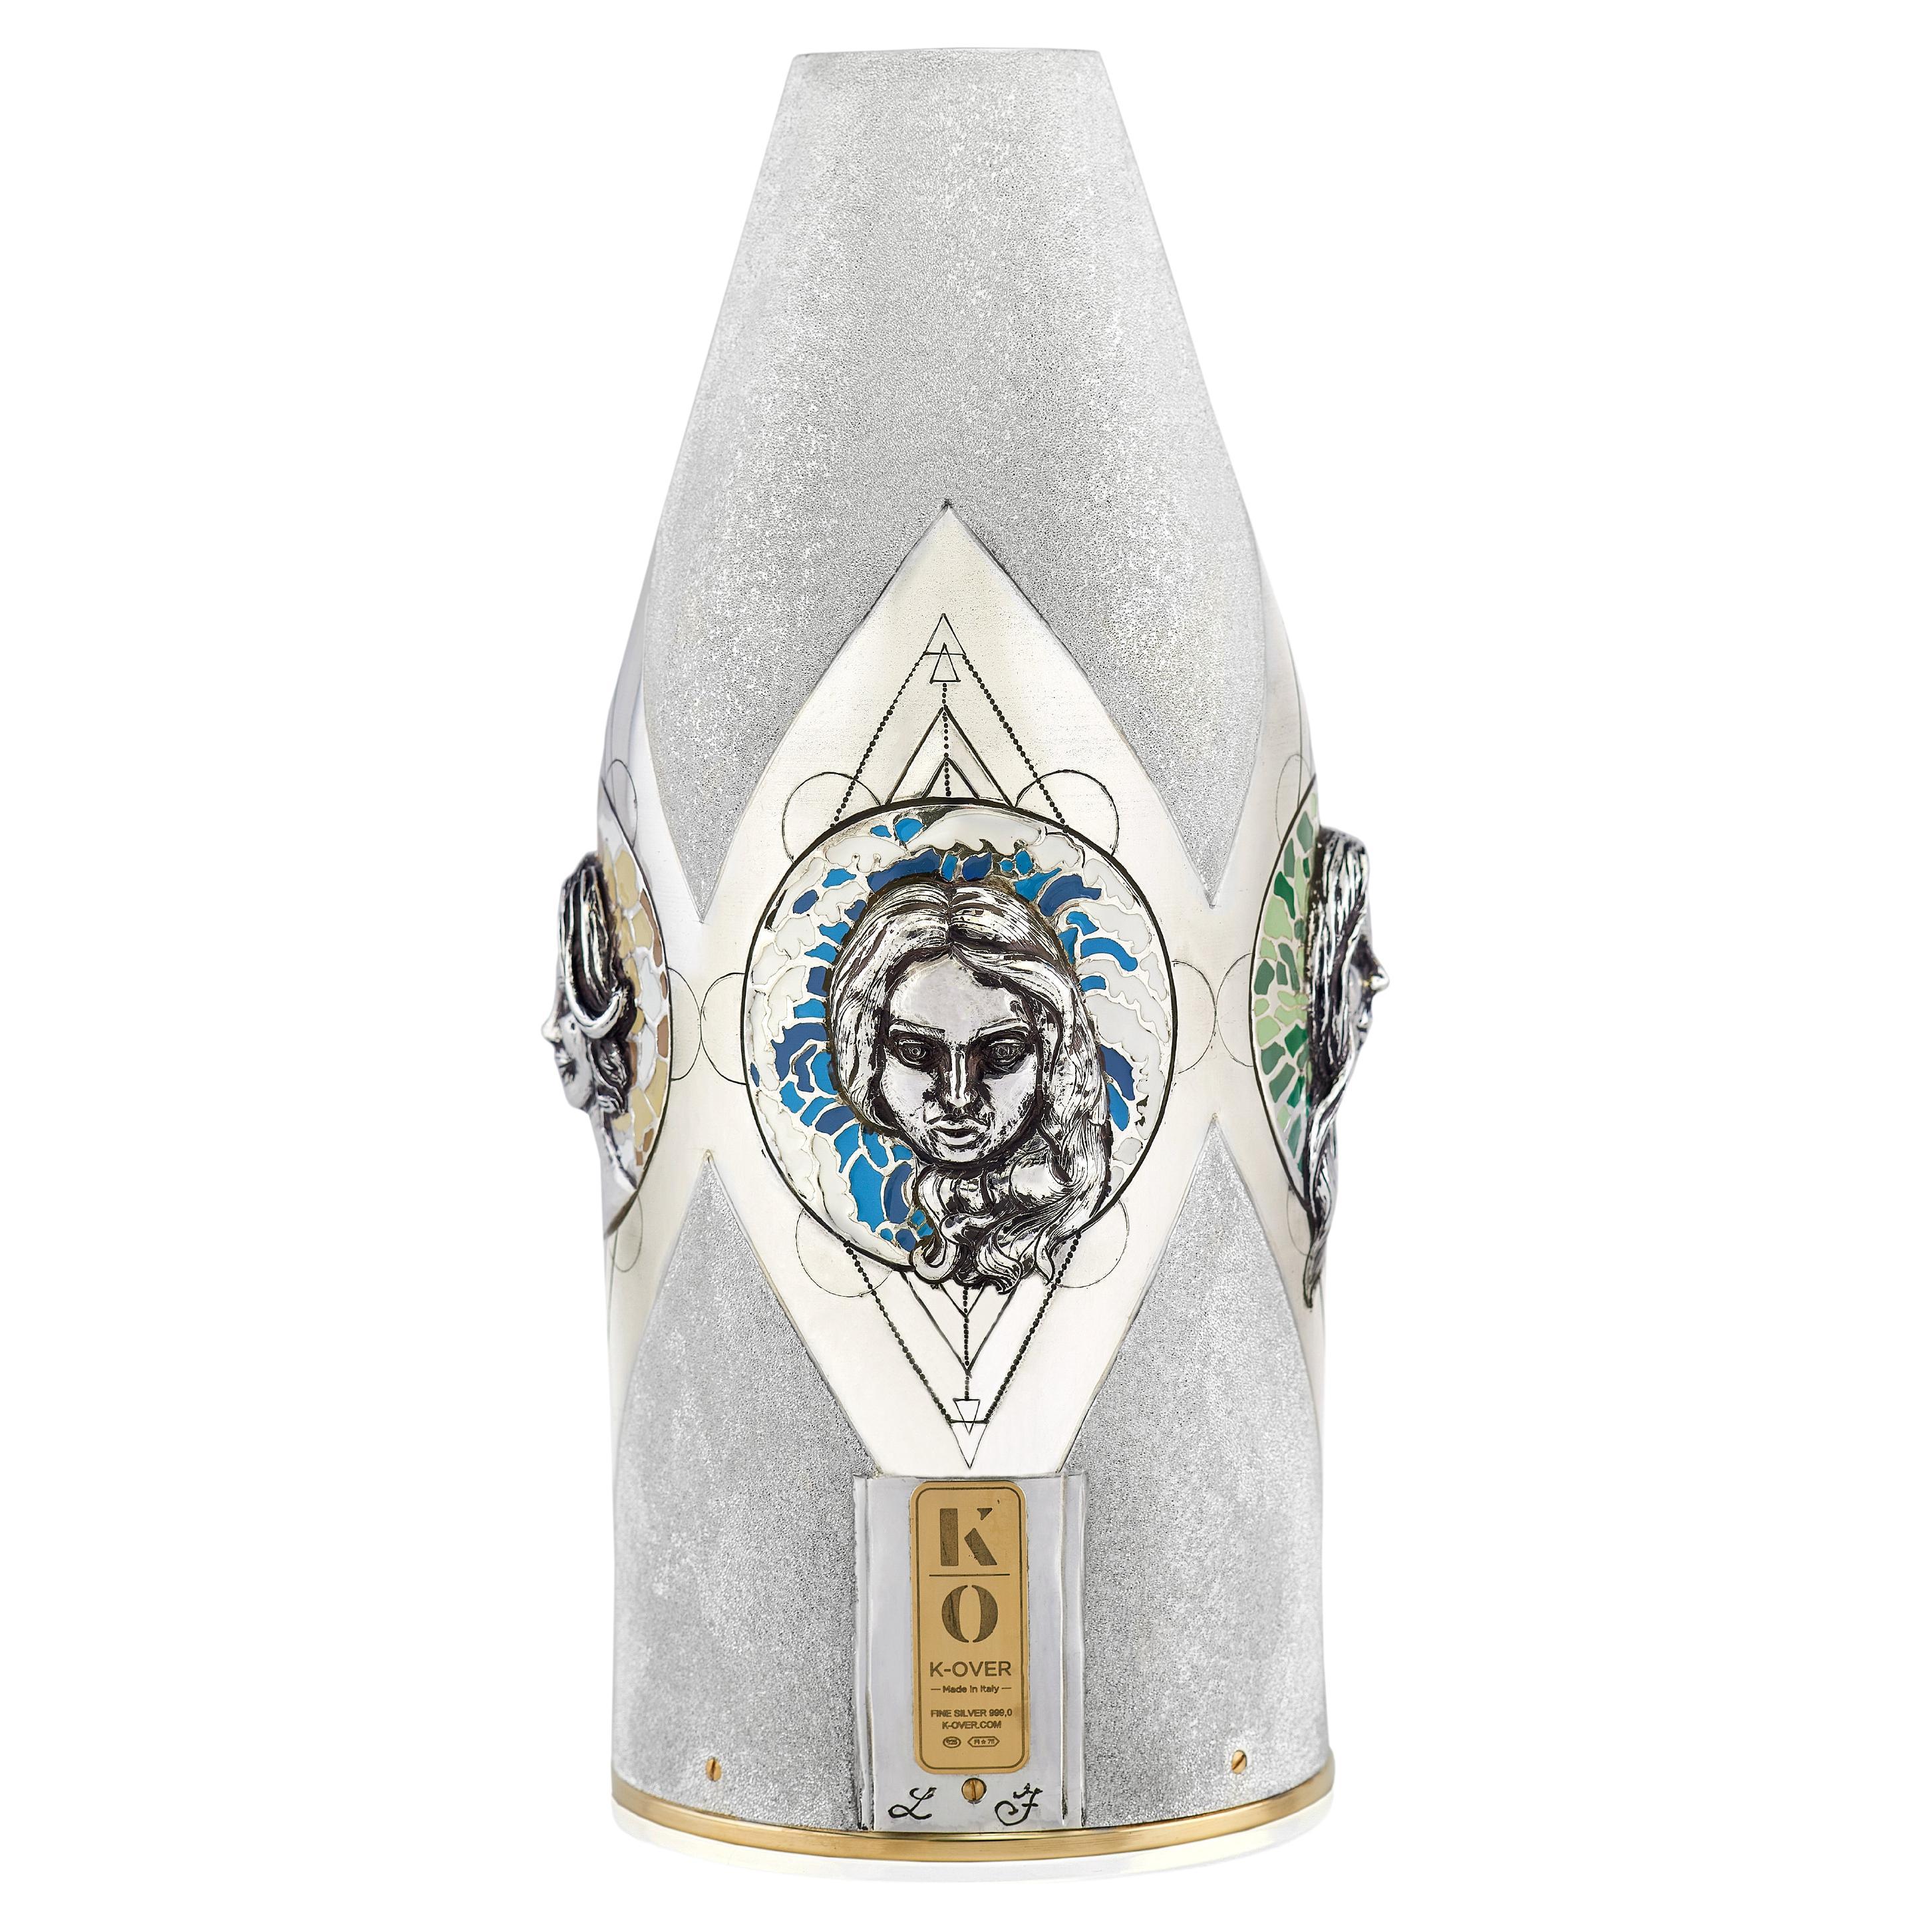 This champagne bottle cover is a distinguished new piece from our Works of Art Collection, showcasing the vision of the artist of the 4  elements of the Cosmos : earth, water, fire, air. In the Hellenic tradition, the four elements are the realms of